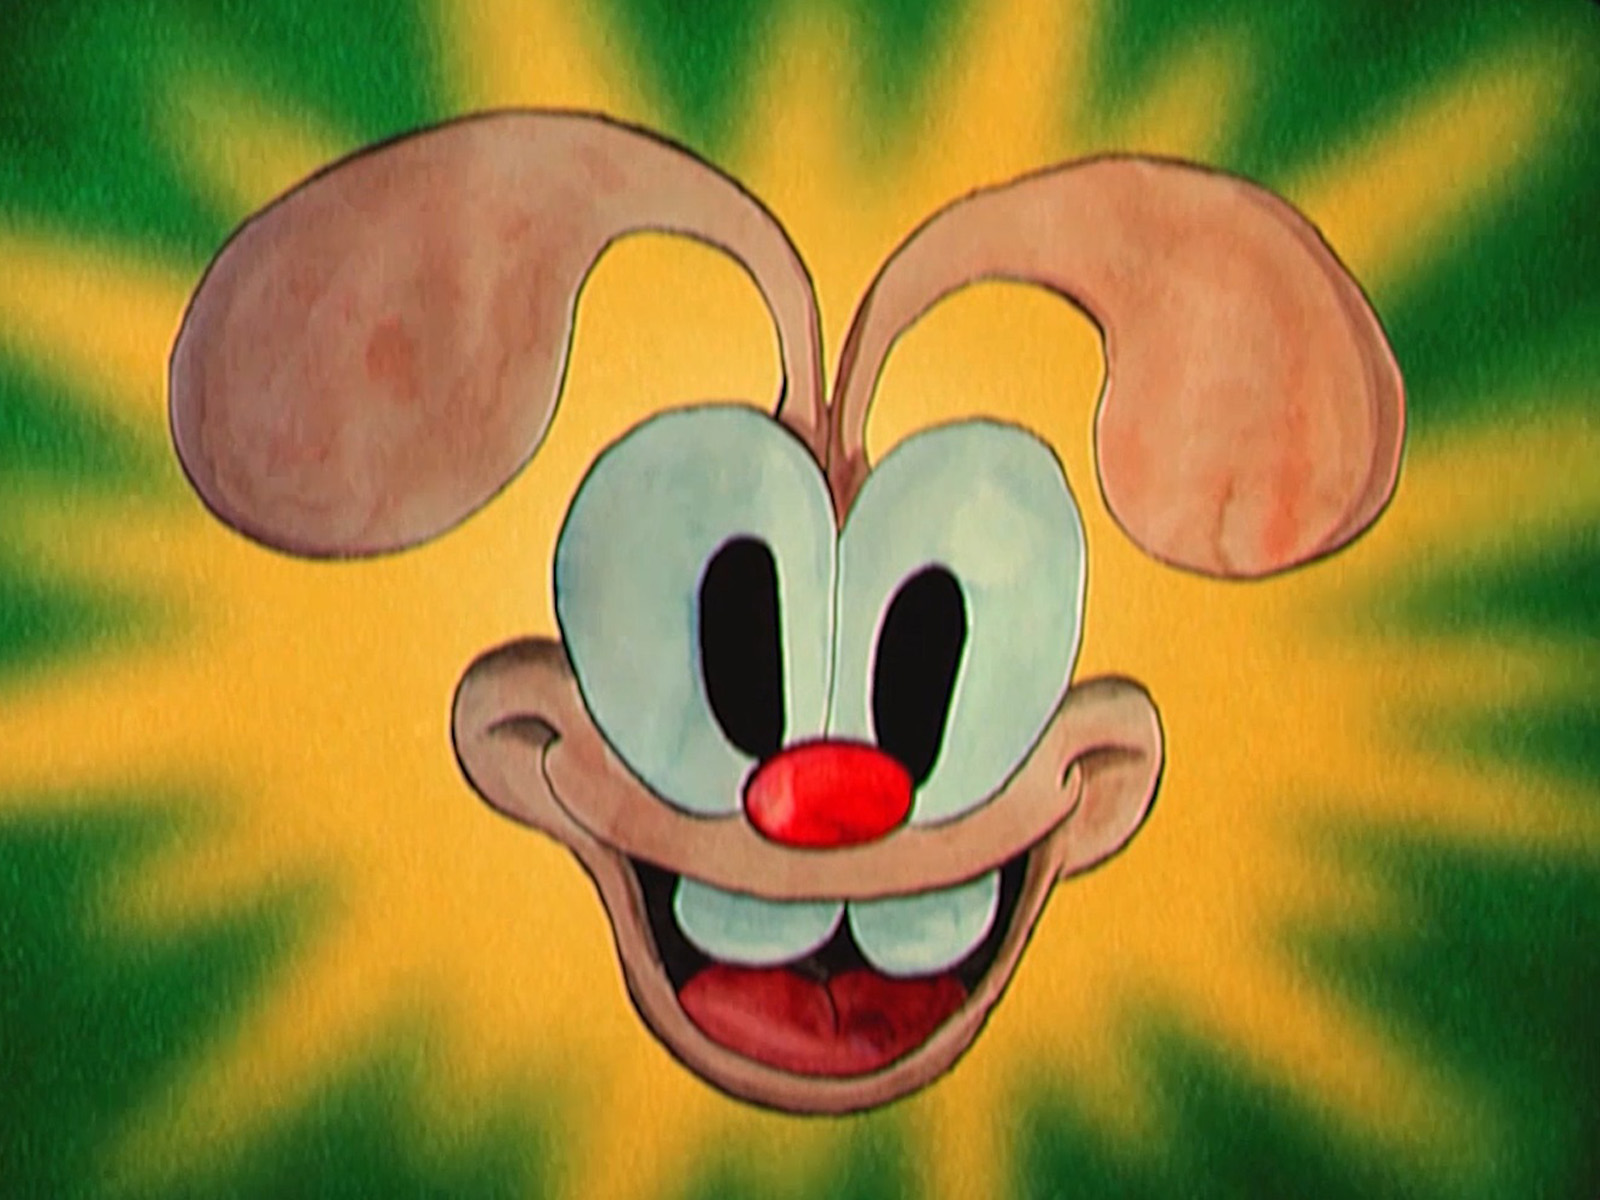 A look at the face of Conej, the main bunny character, surrounded by green and yellow light